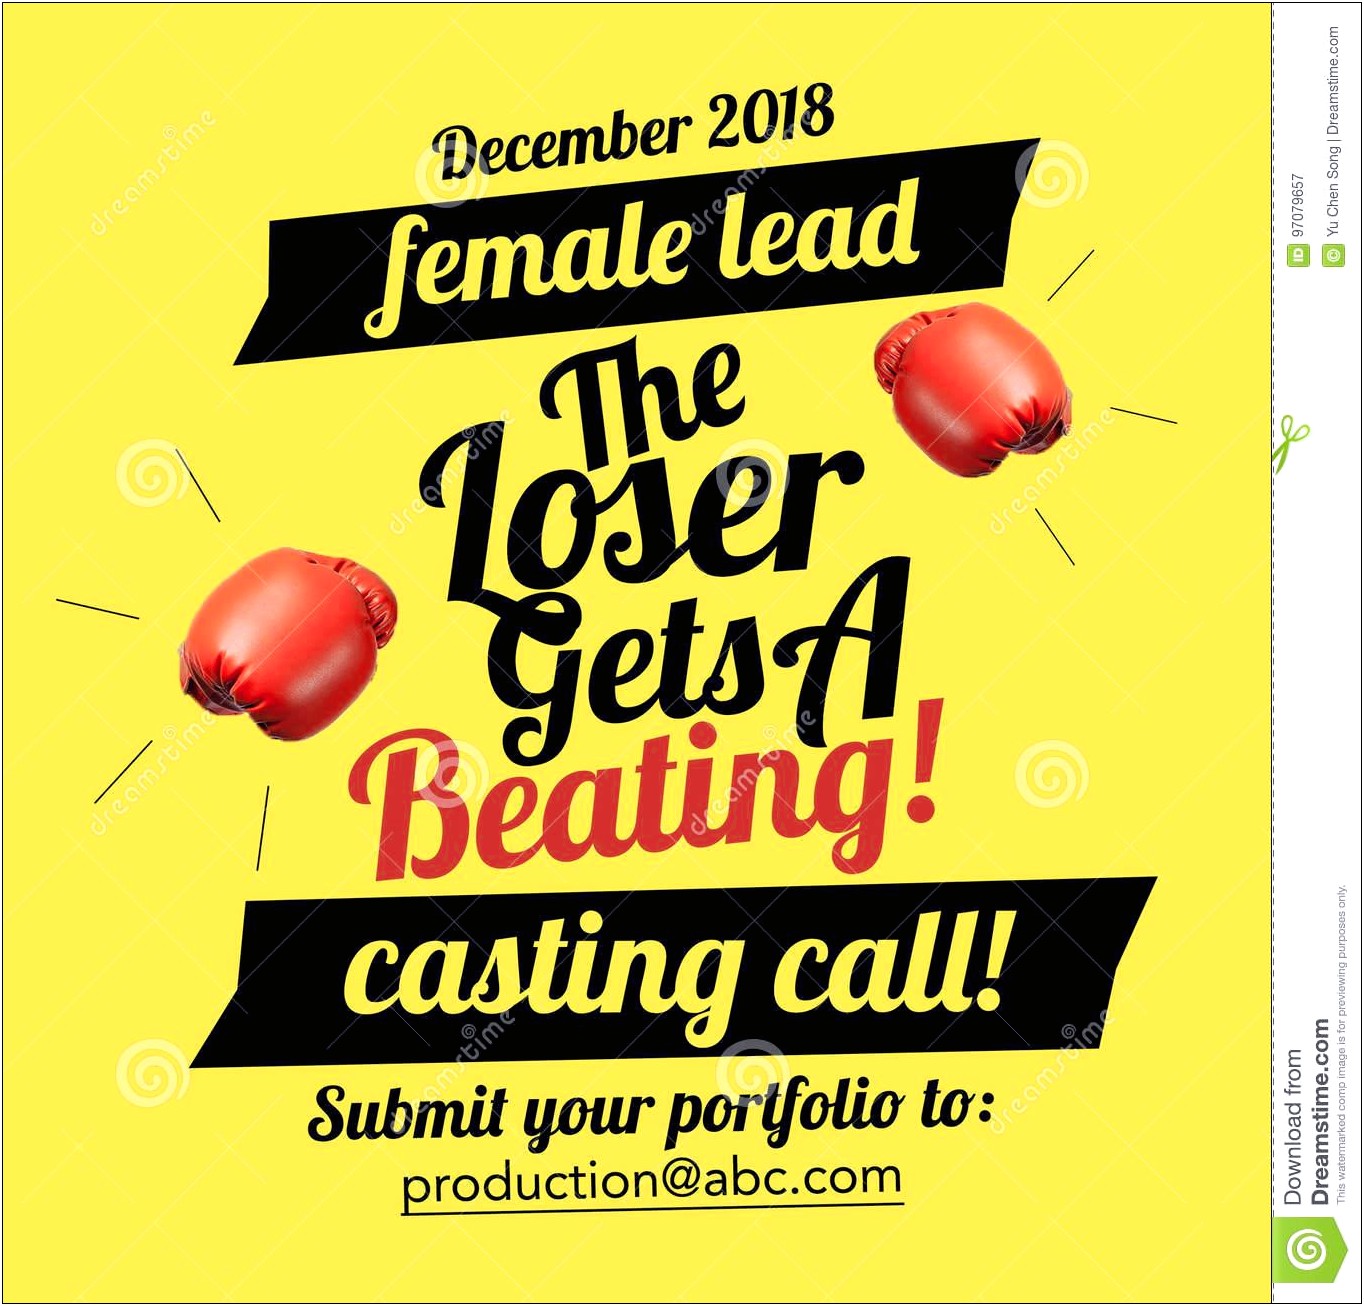 Casting Call Poster Template Free Download